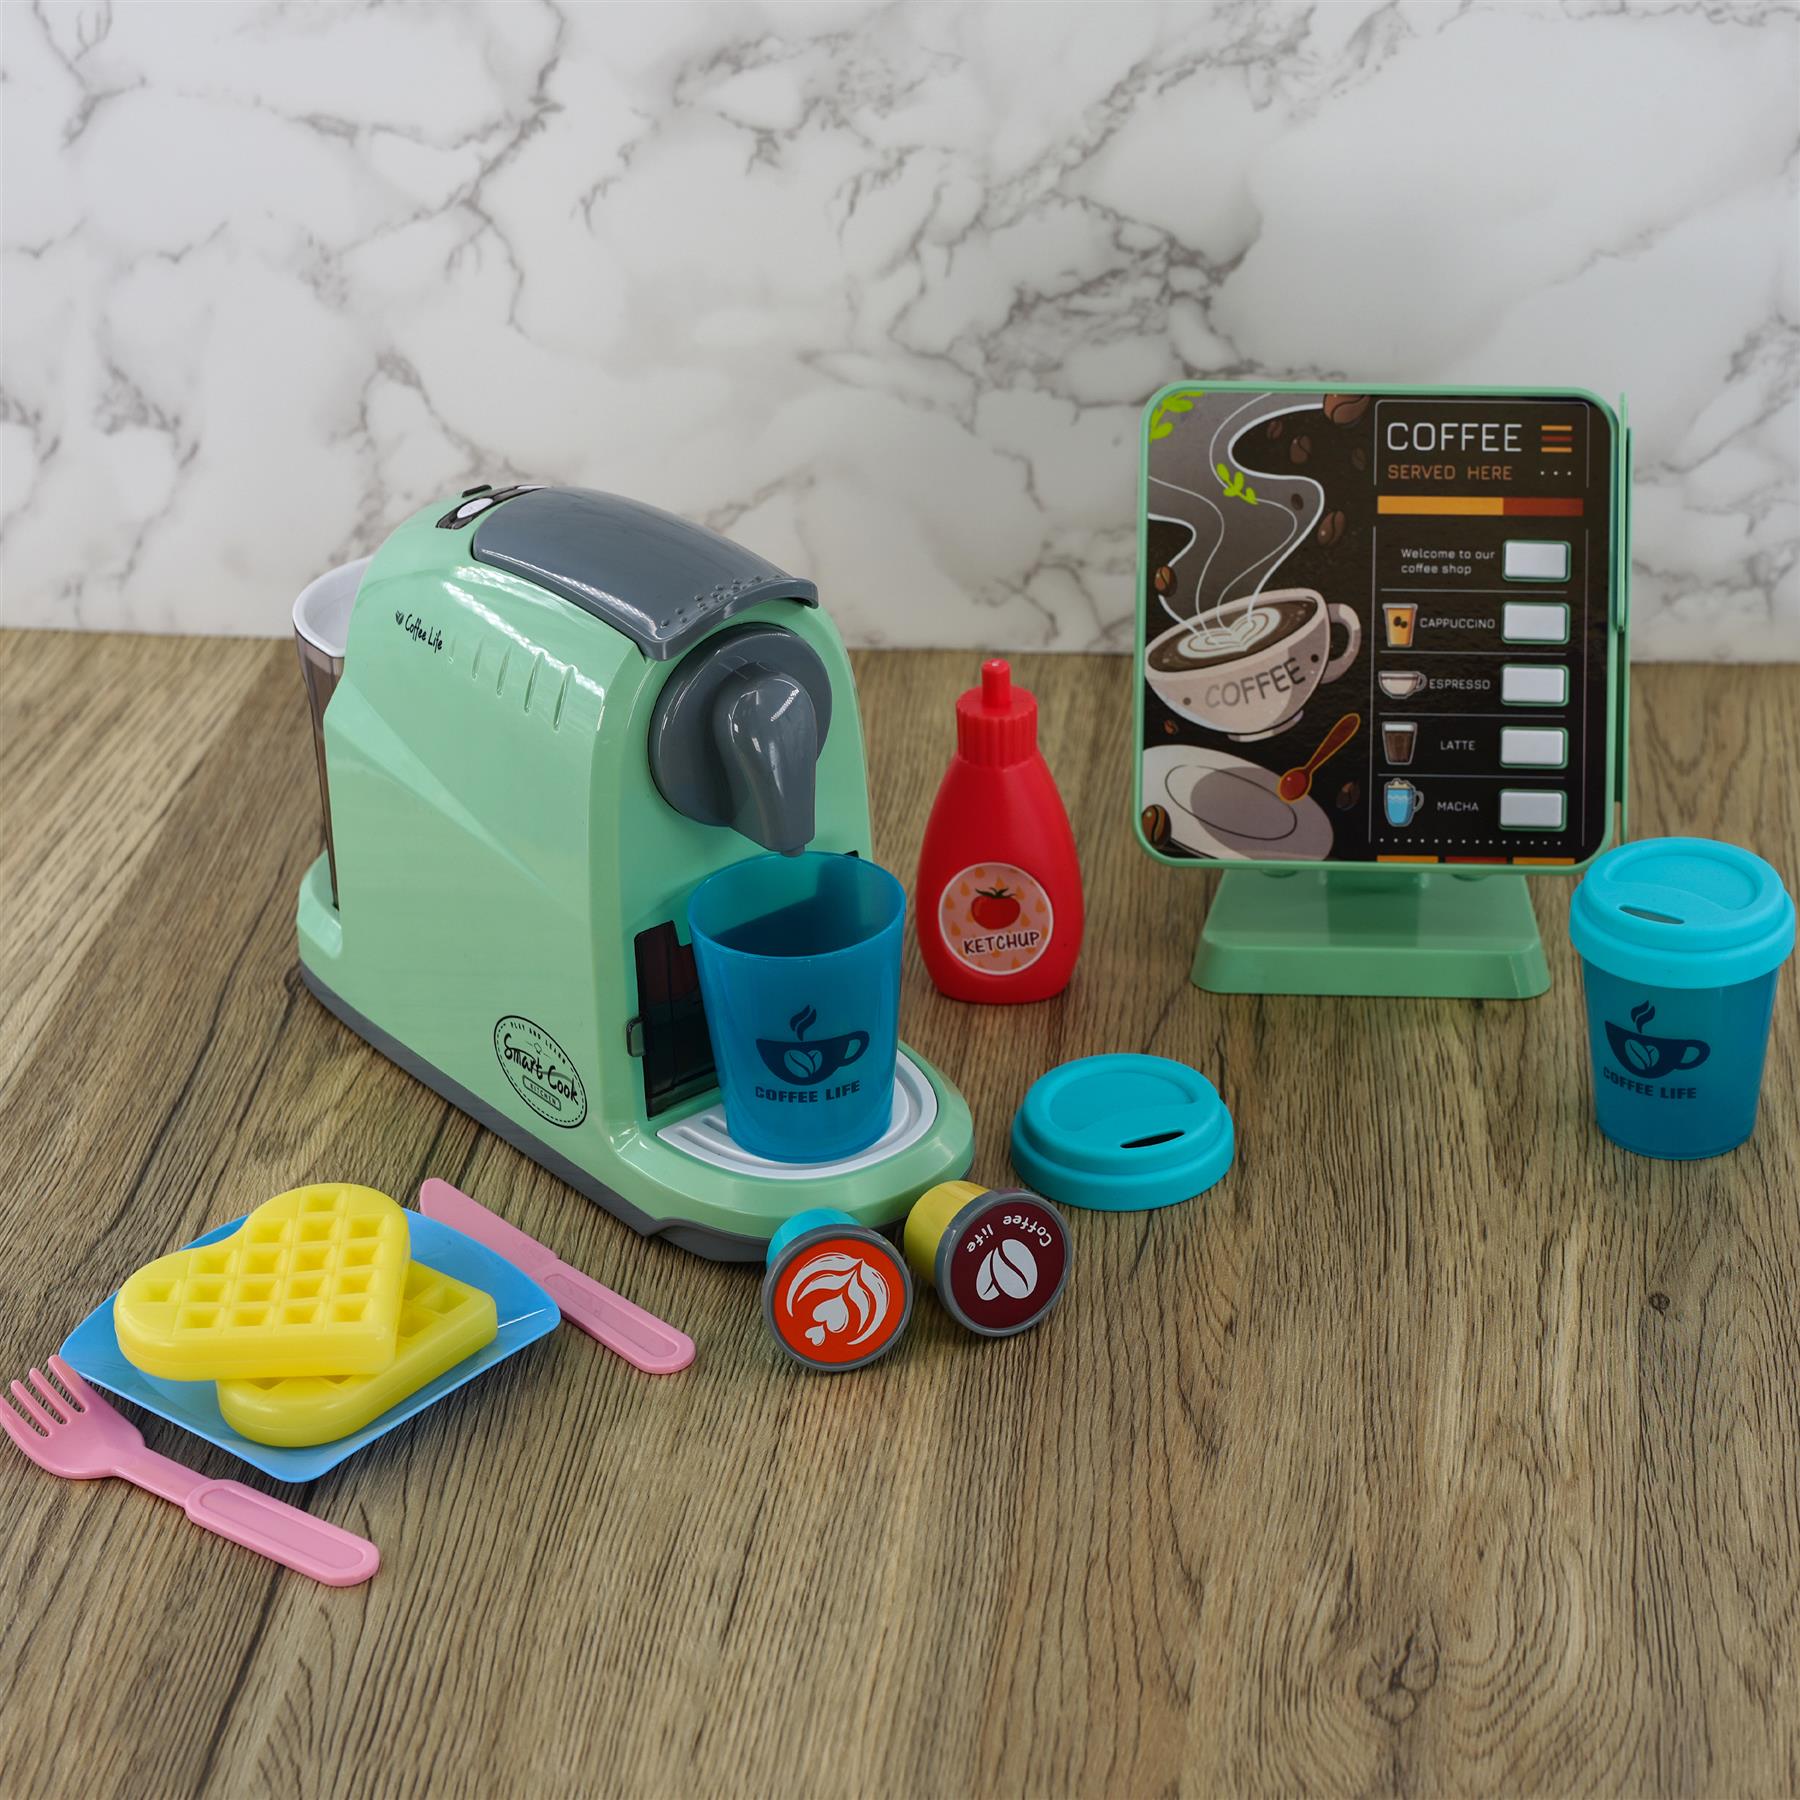 The Magic Toy Shop Toy Play Set Kids Coffee Maker Machine Toy Kitchen Role Play Set with Cash Register Play Food